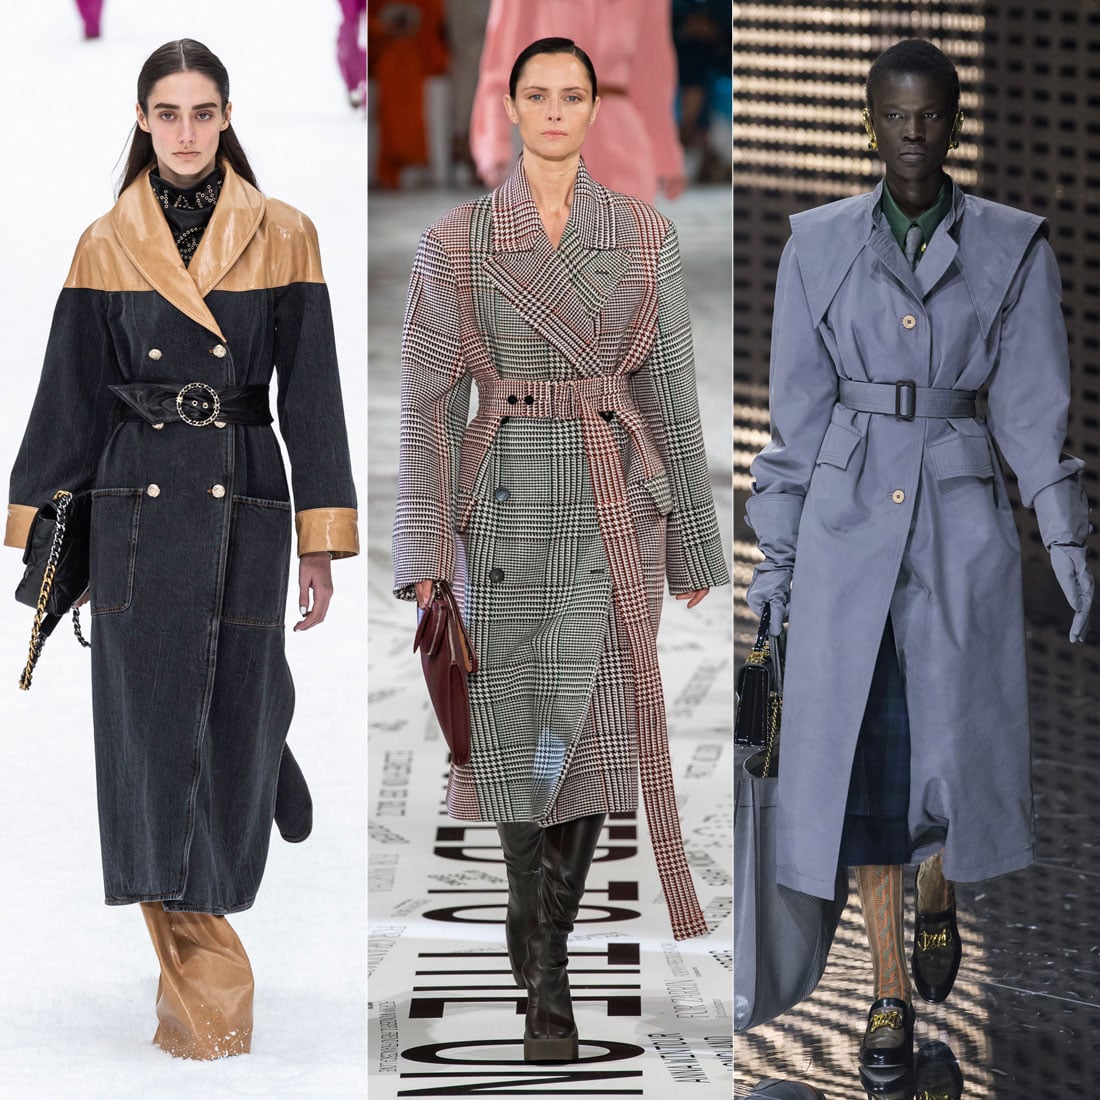 Ruined Comorama Danube Fall Fashion Trends 2019: The Belted Trench Coat | The 9 Most Wearable  Trends For Fall | POPSUGAR Fashion Photo 89